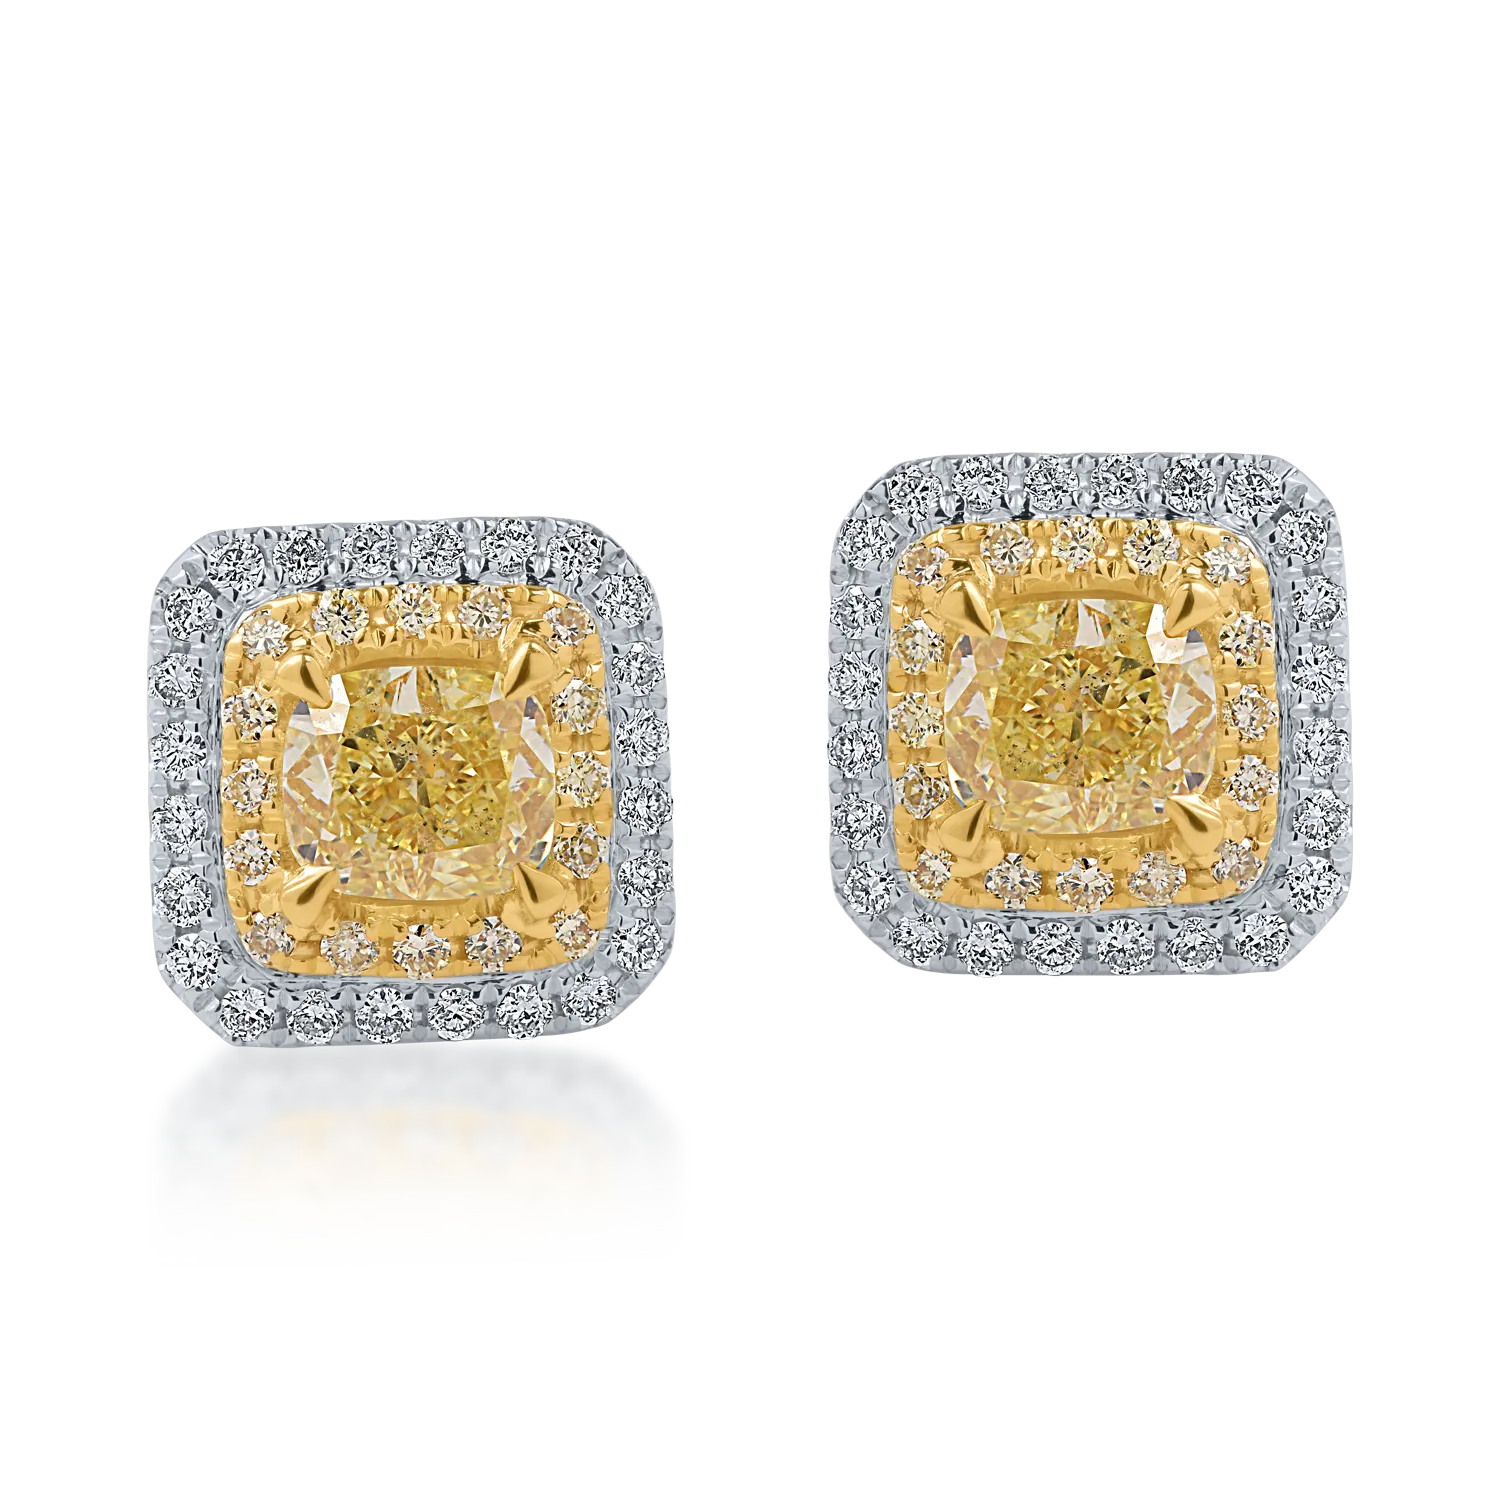 White-yellow gold earrings with 1.32ct yellow diamonds and 0.24ct clear diamonds